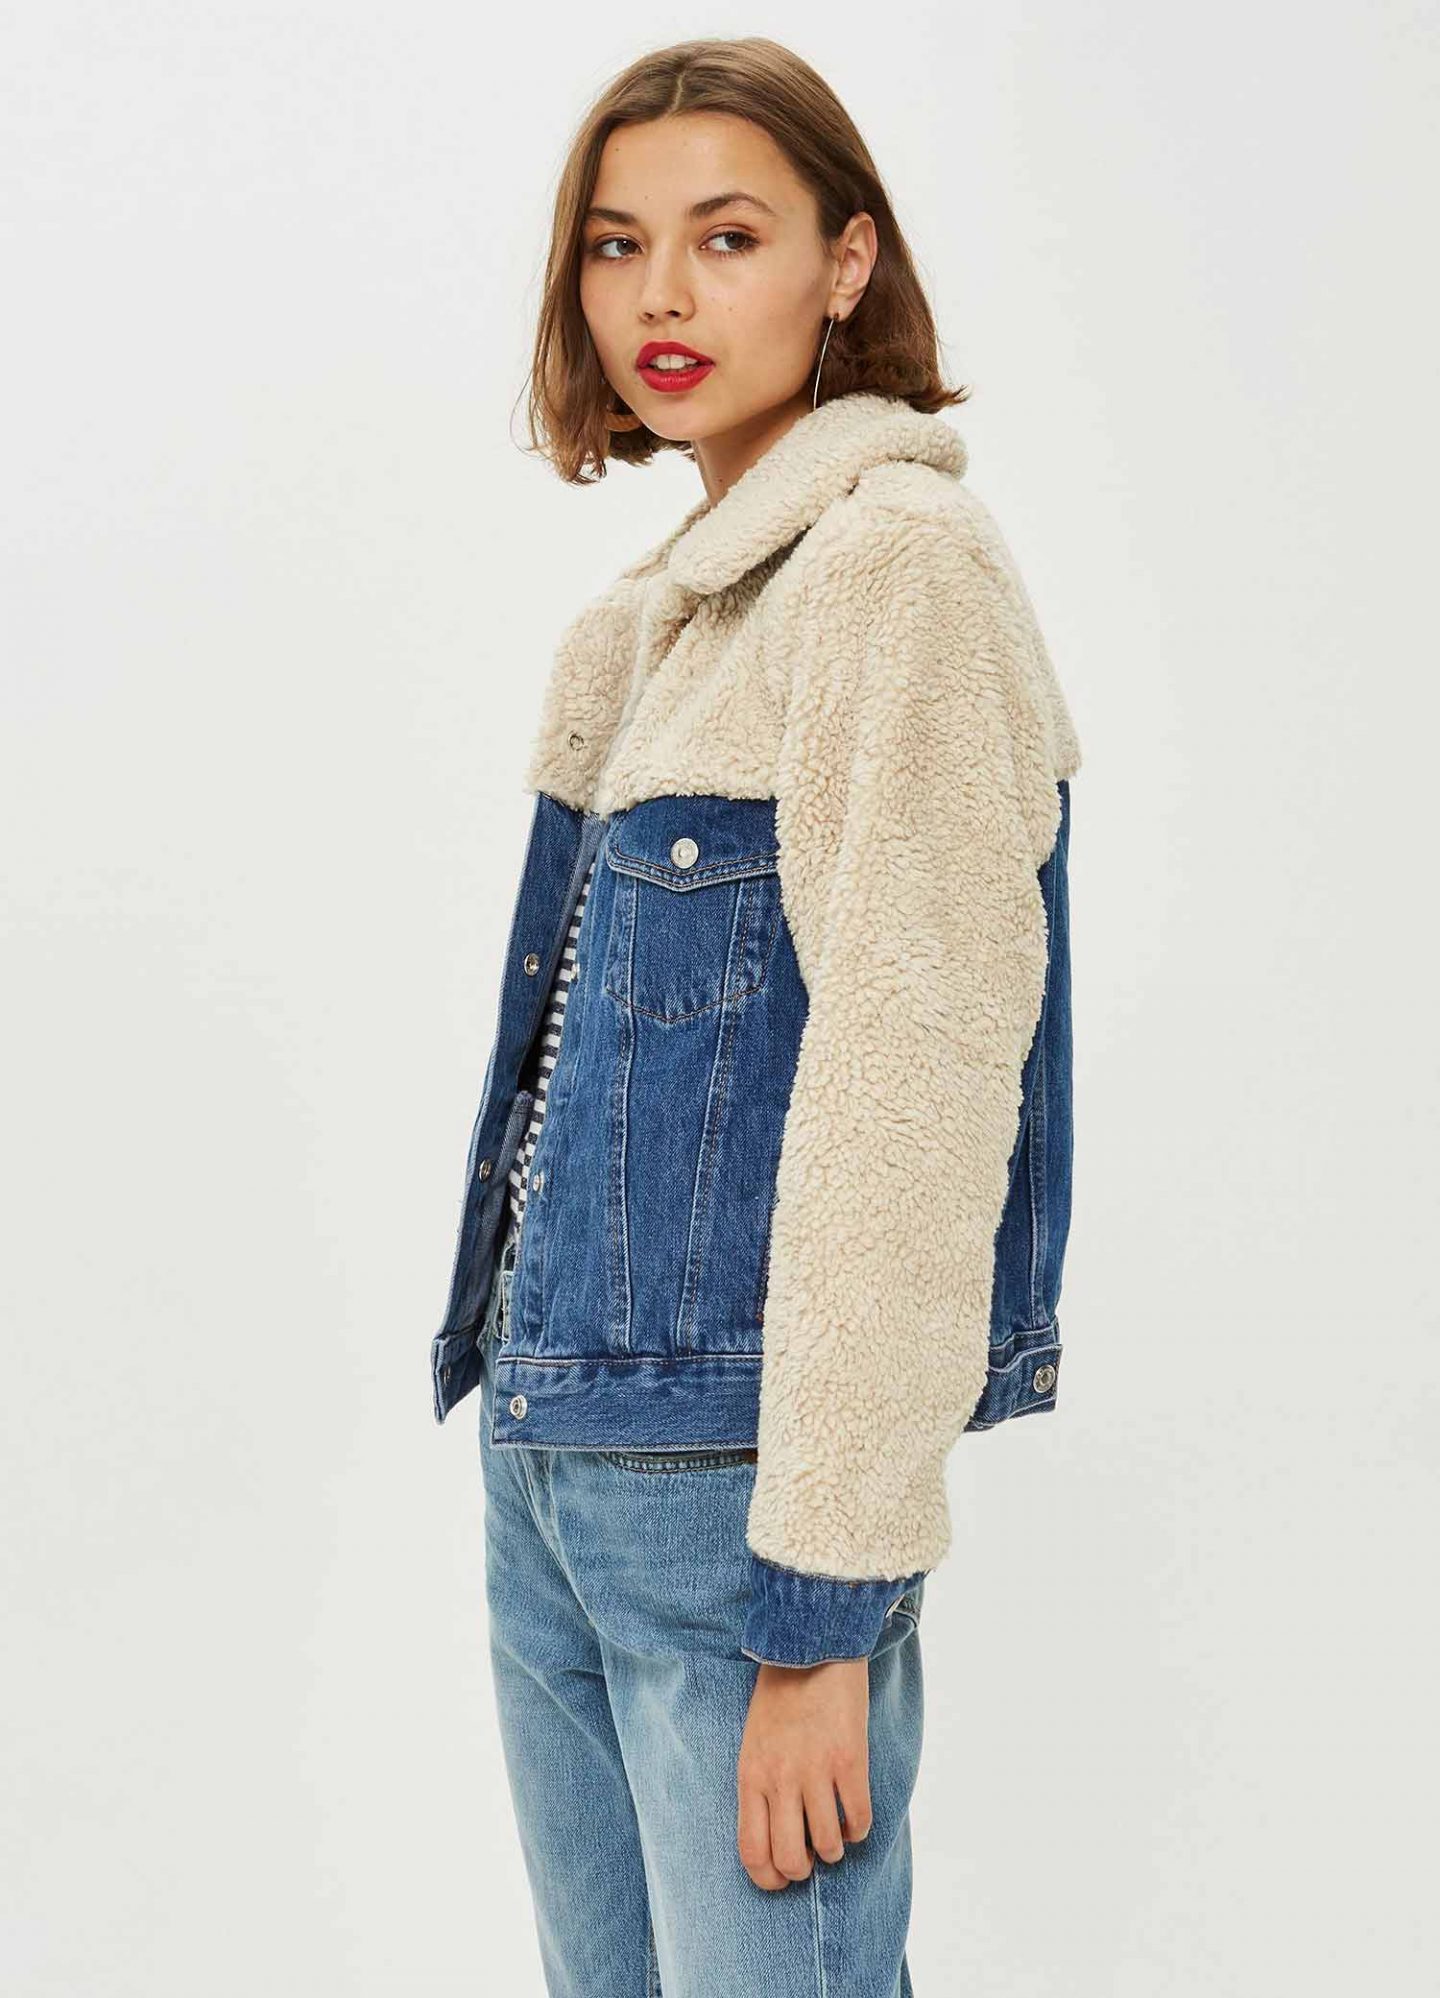 The Topshop Denim Borg Jacket Everyone Is Talking About - THE JEANS BLOG